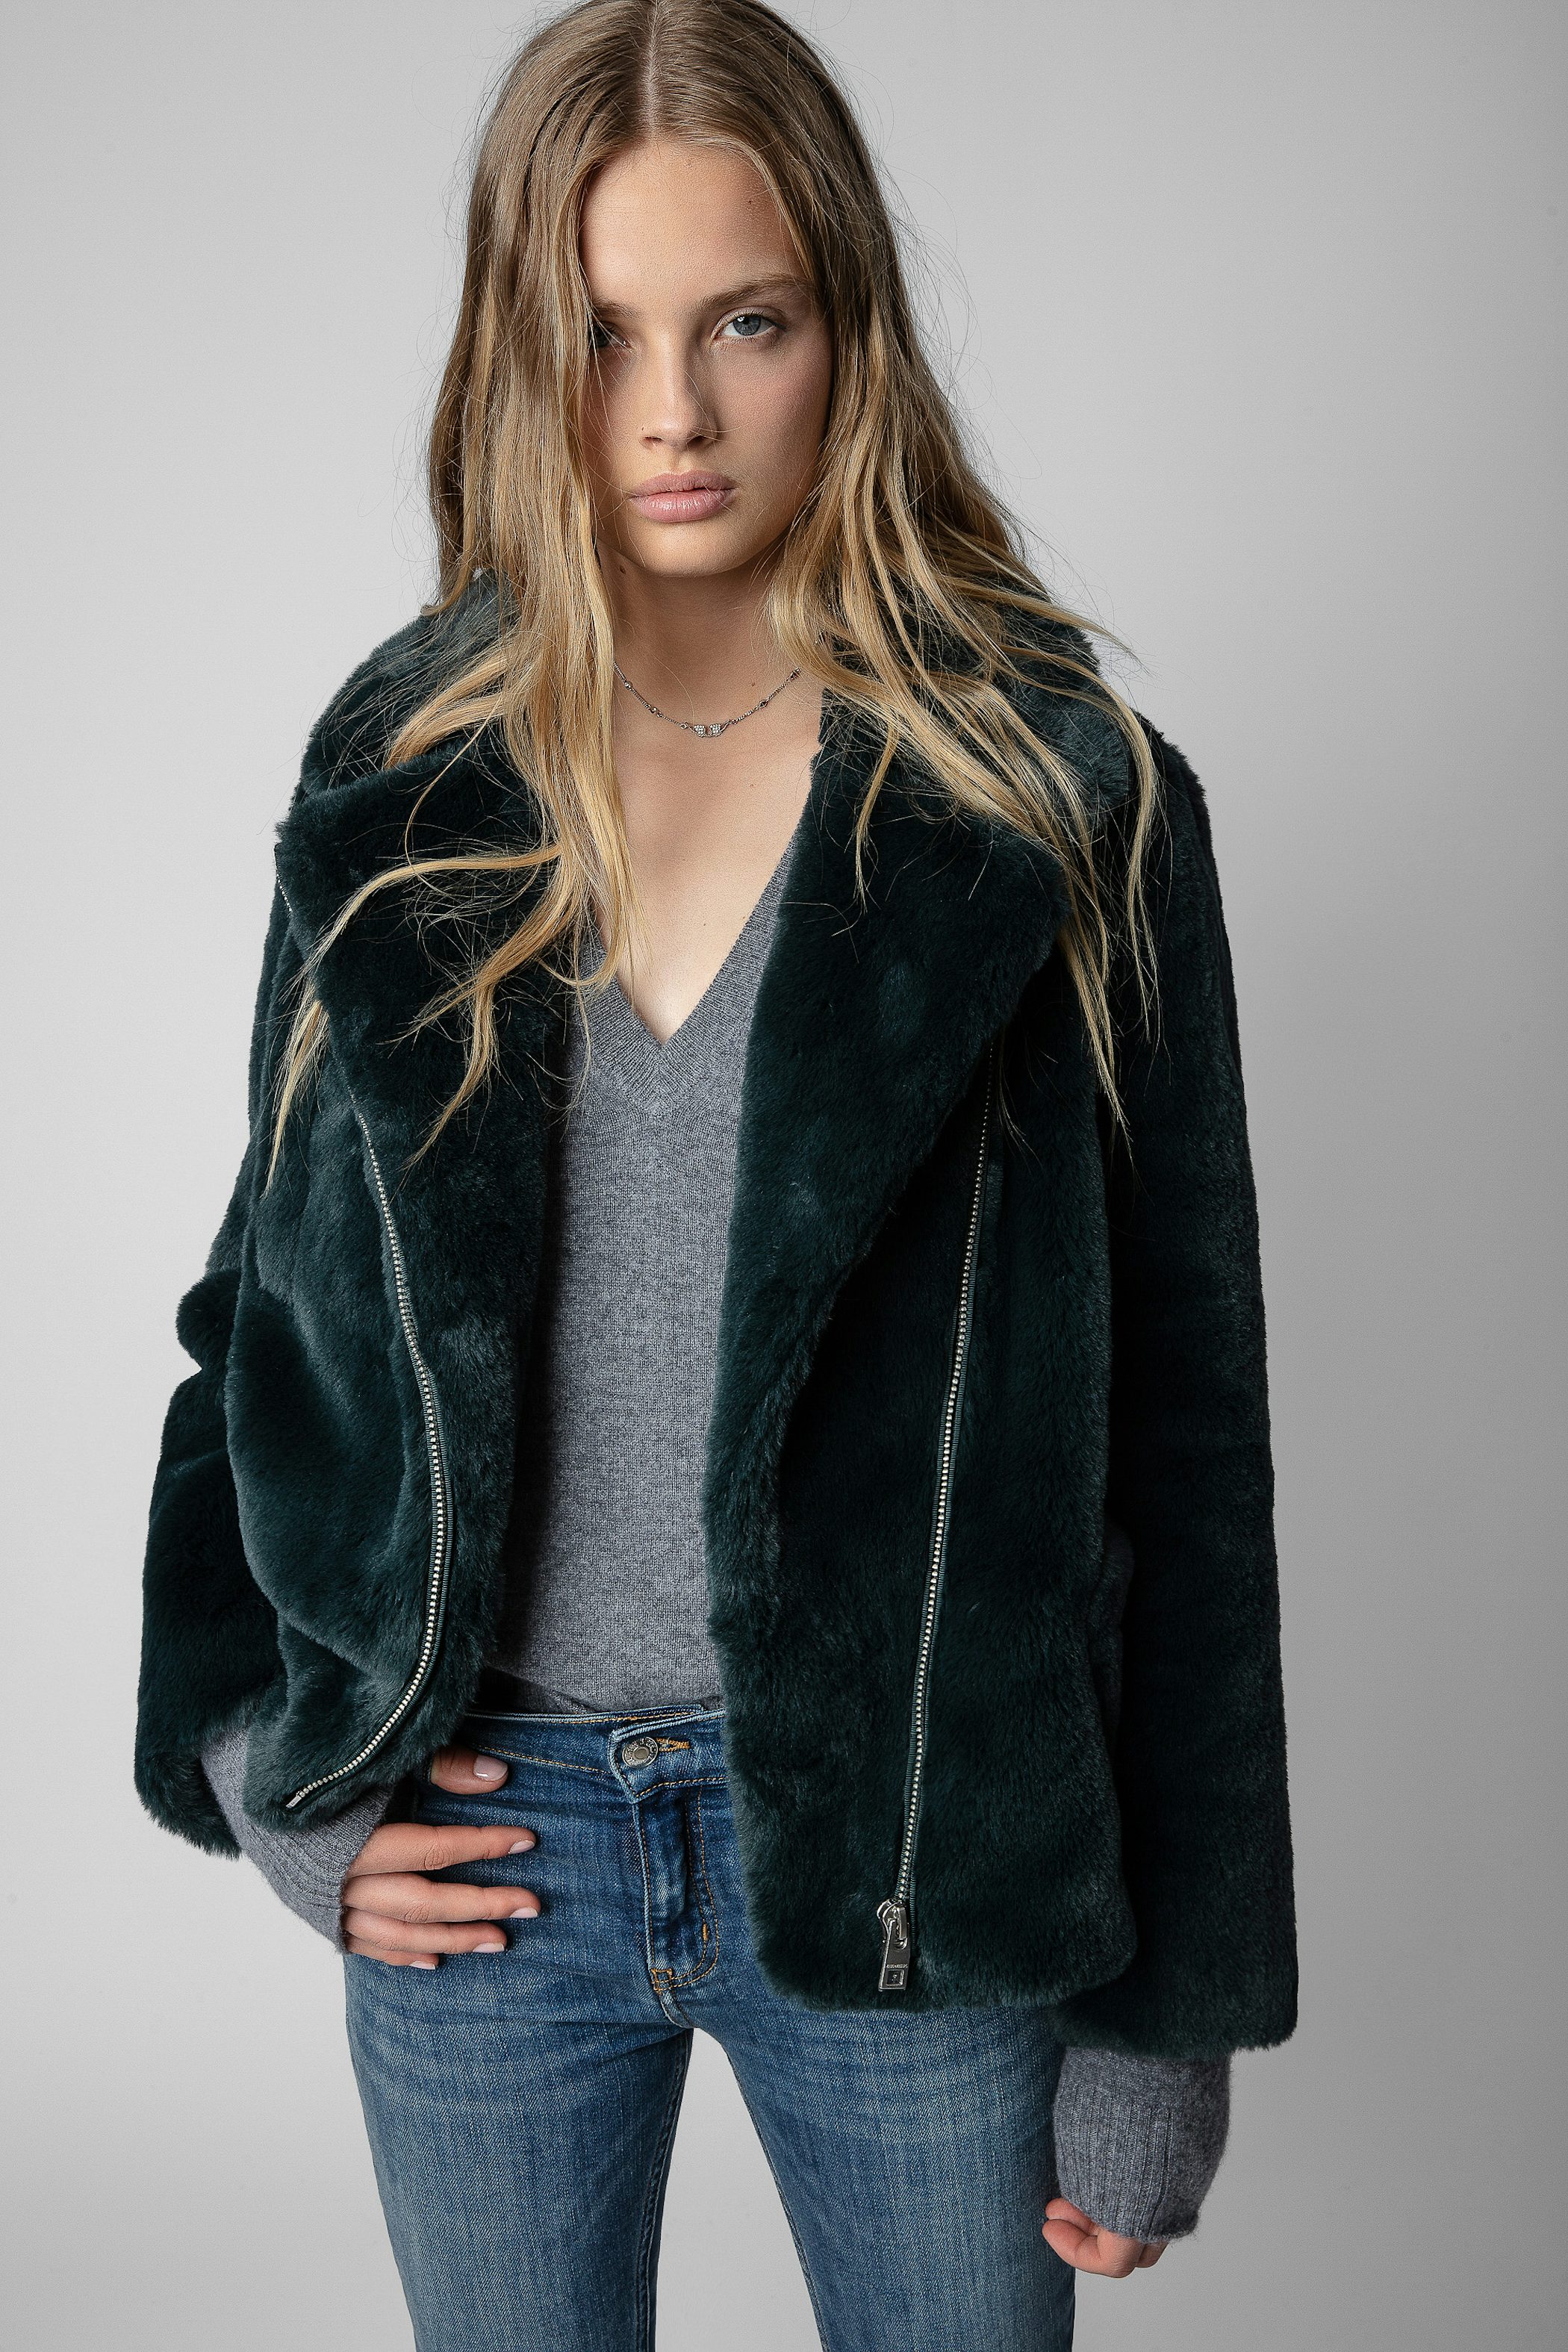 Women’s chic and trendy coats and blazers | Zadig&Voltaire